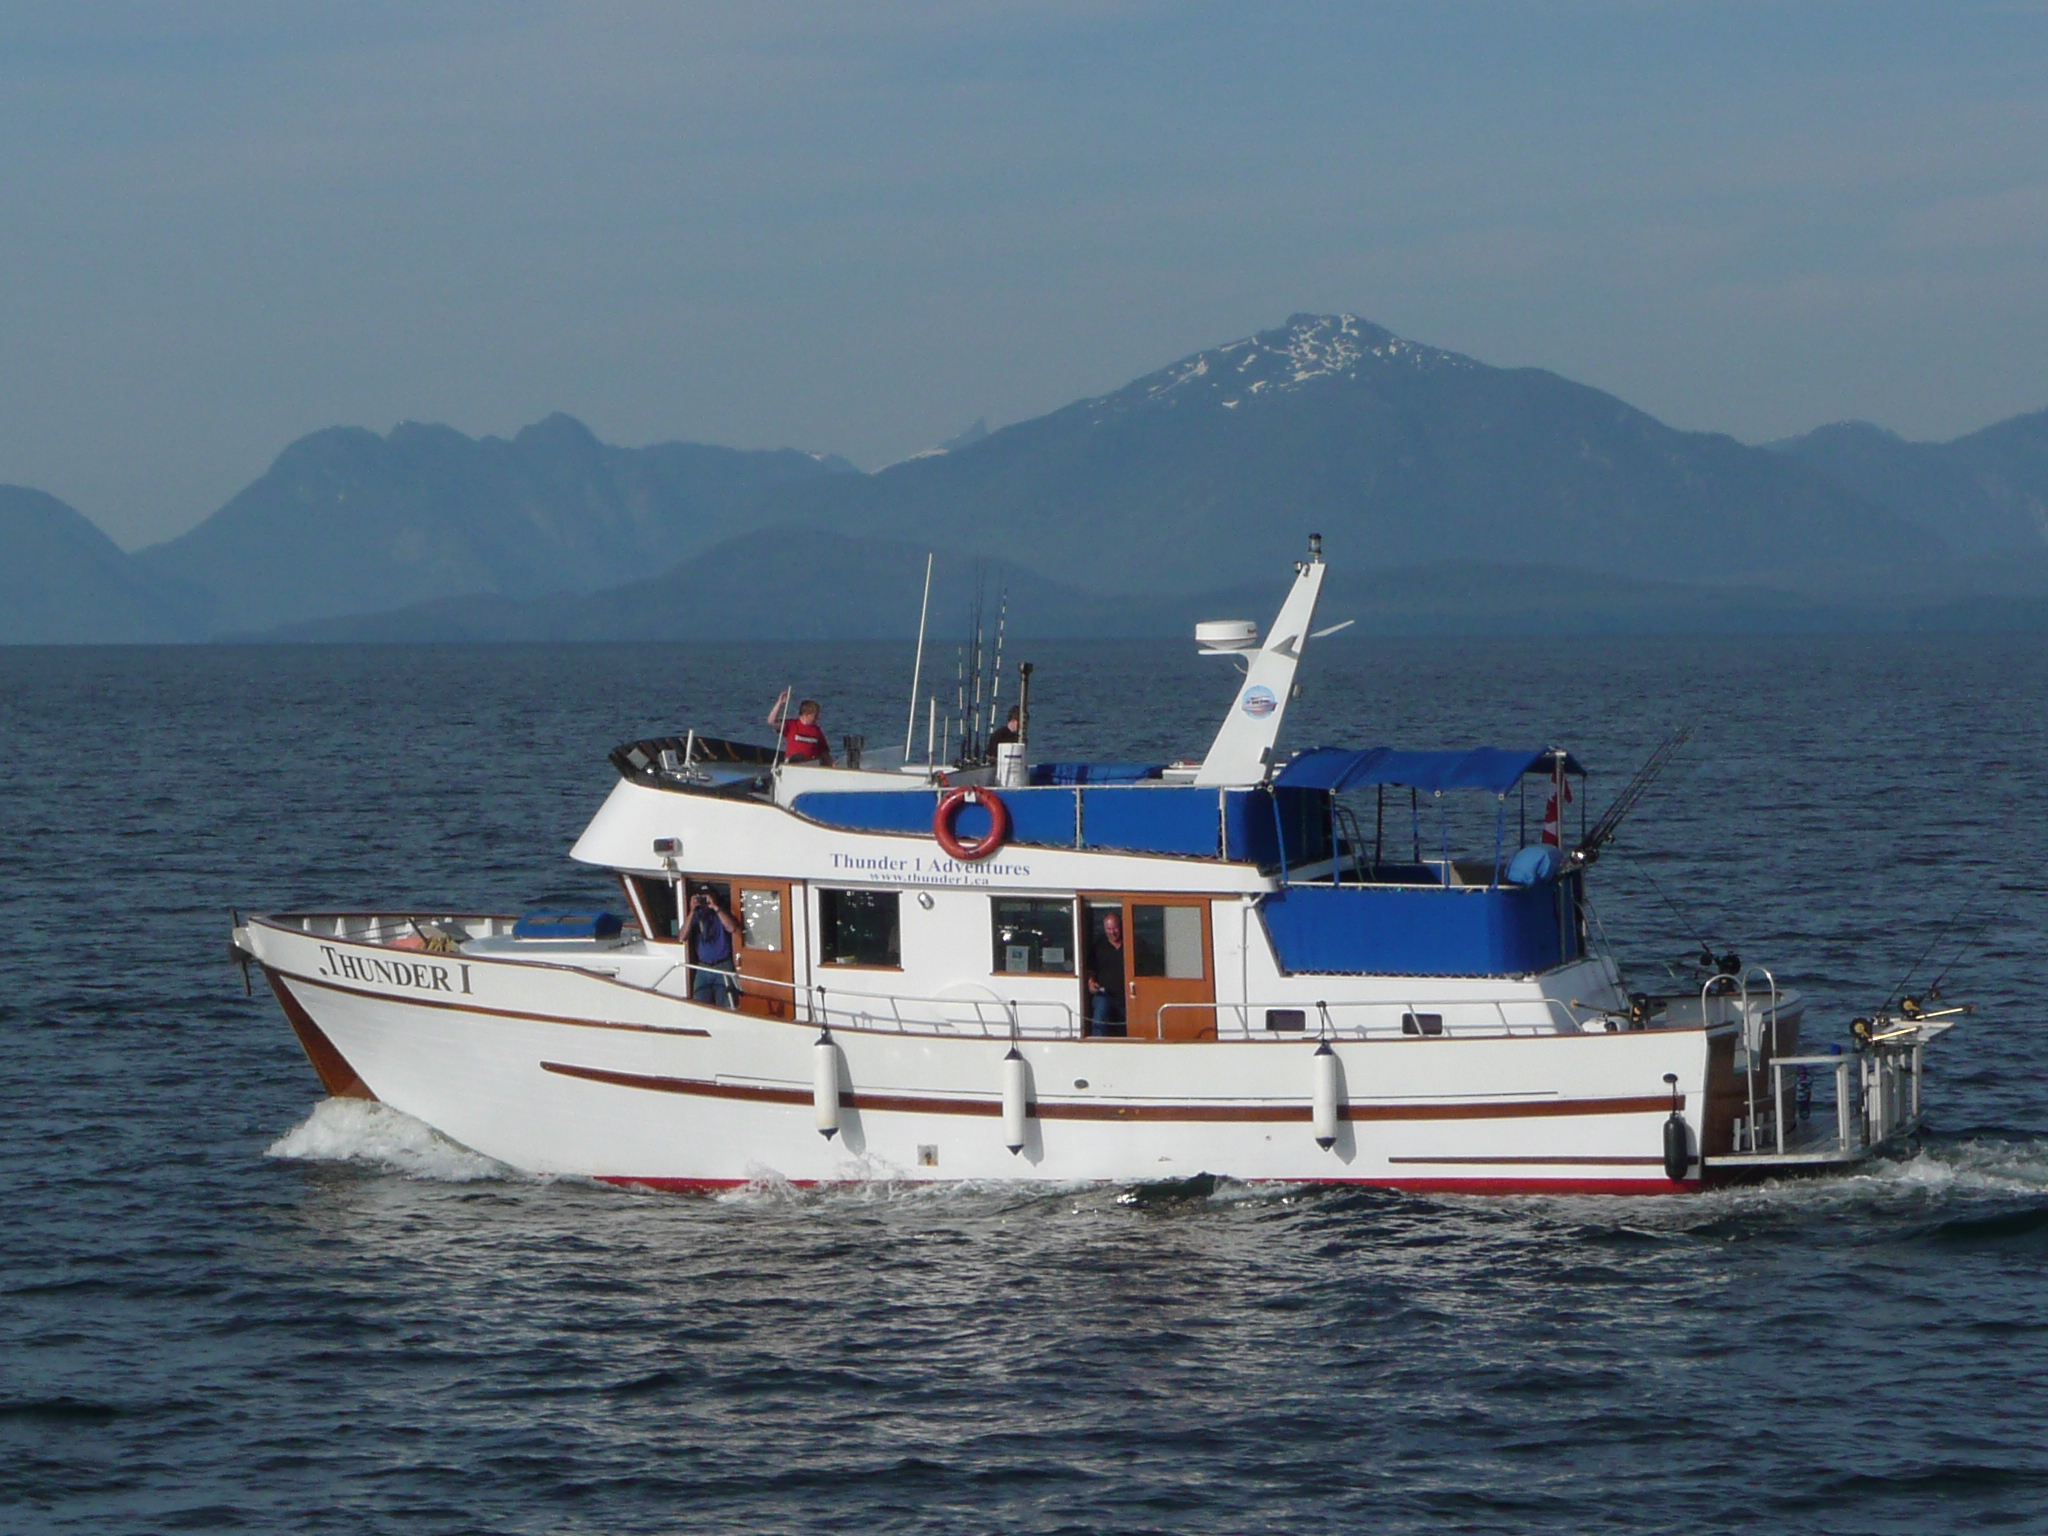 1984 52 foot Other Trawler Power boat for sale in British Columbia, Canada - image 6 